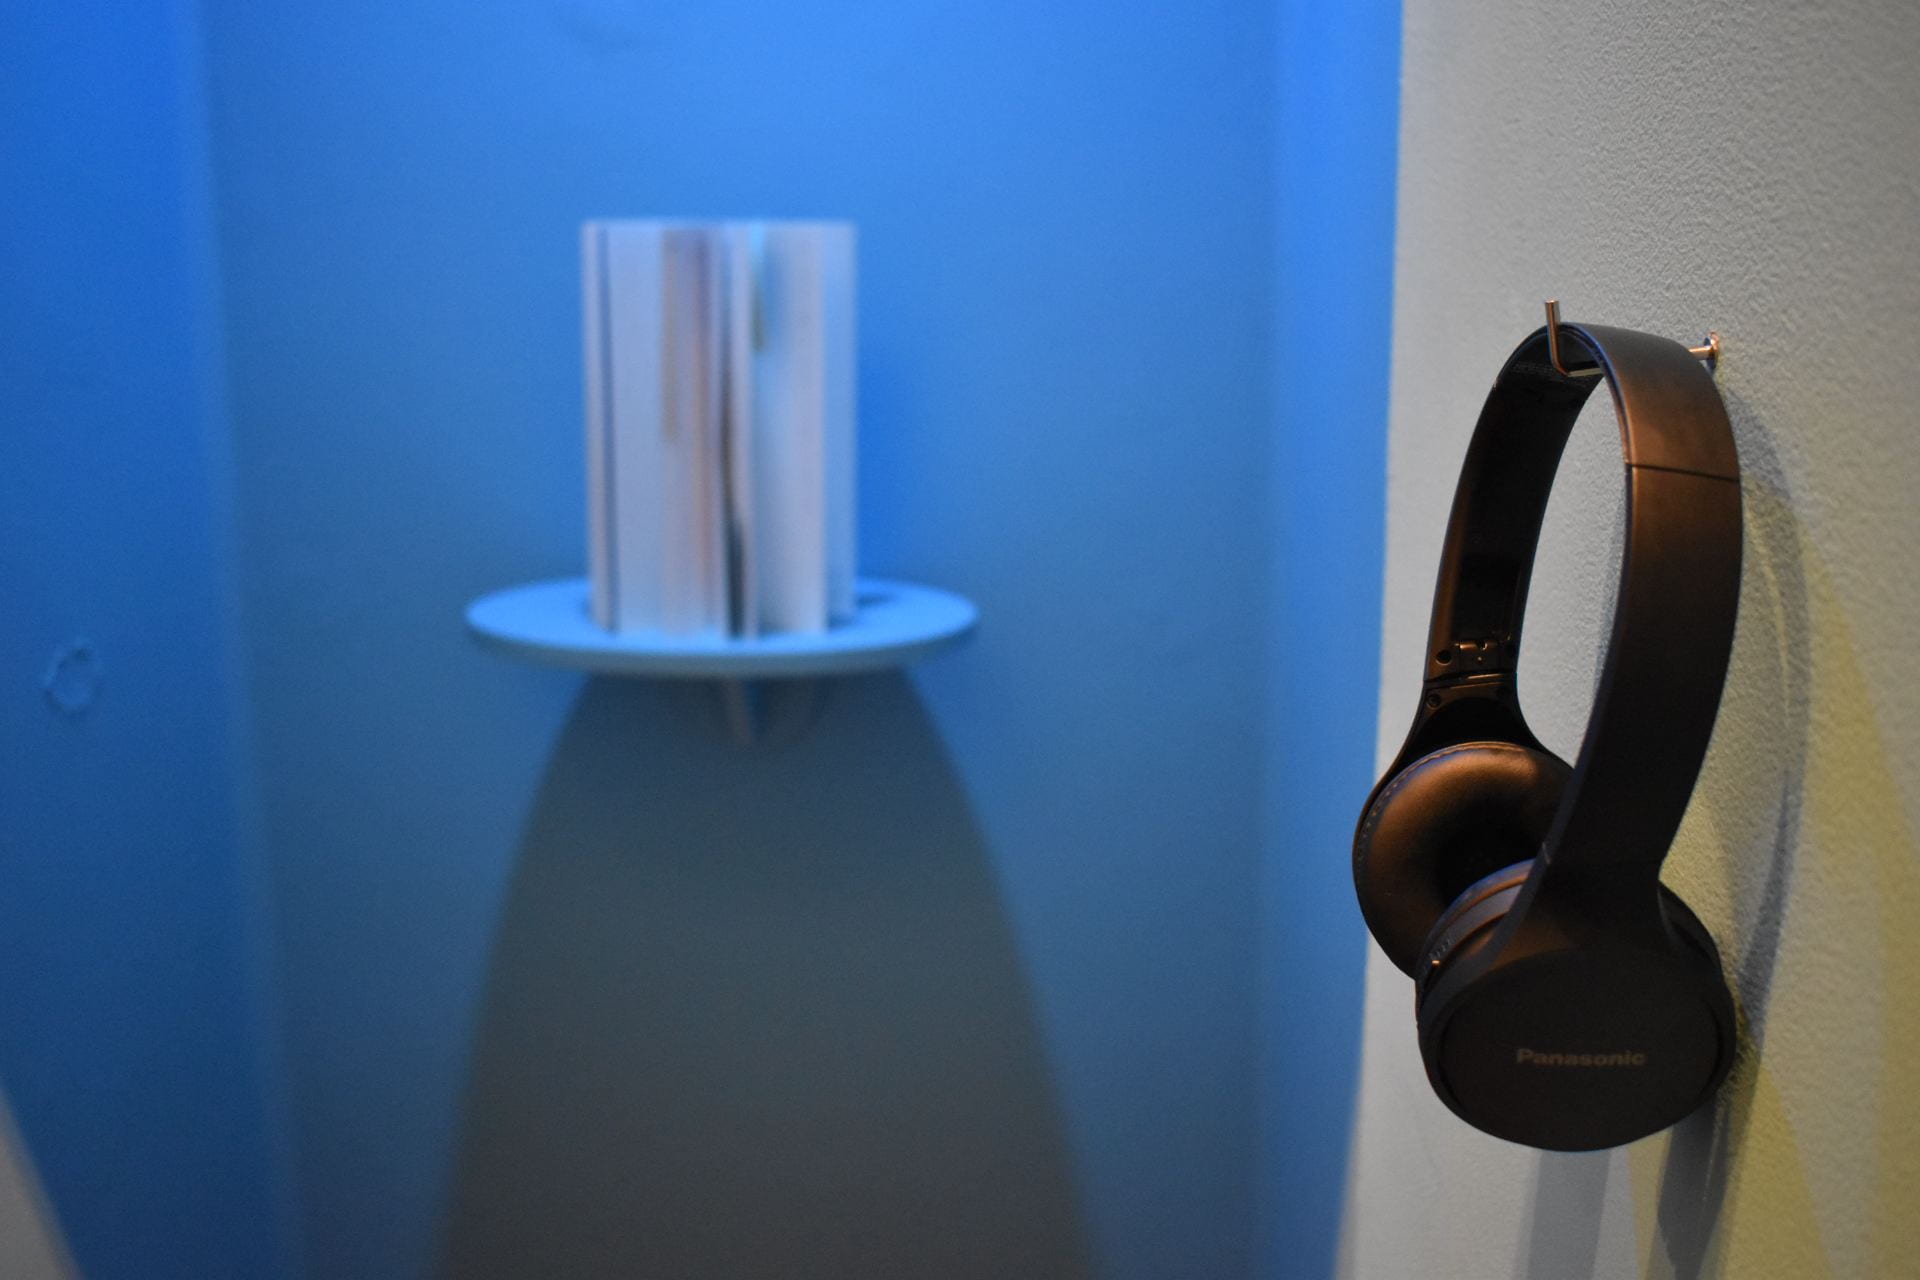 In the foreground, a spiral-bound book is arranged in a circular fashion on a round shelf. In the foreground, a pair of wireless headphones rest on a hook on a blue wall.